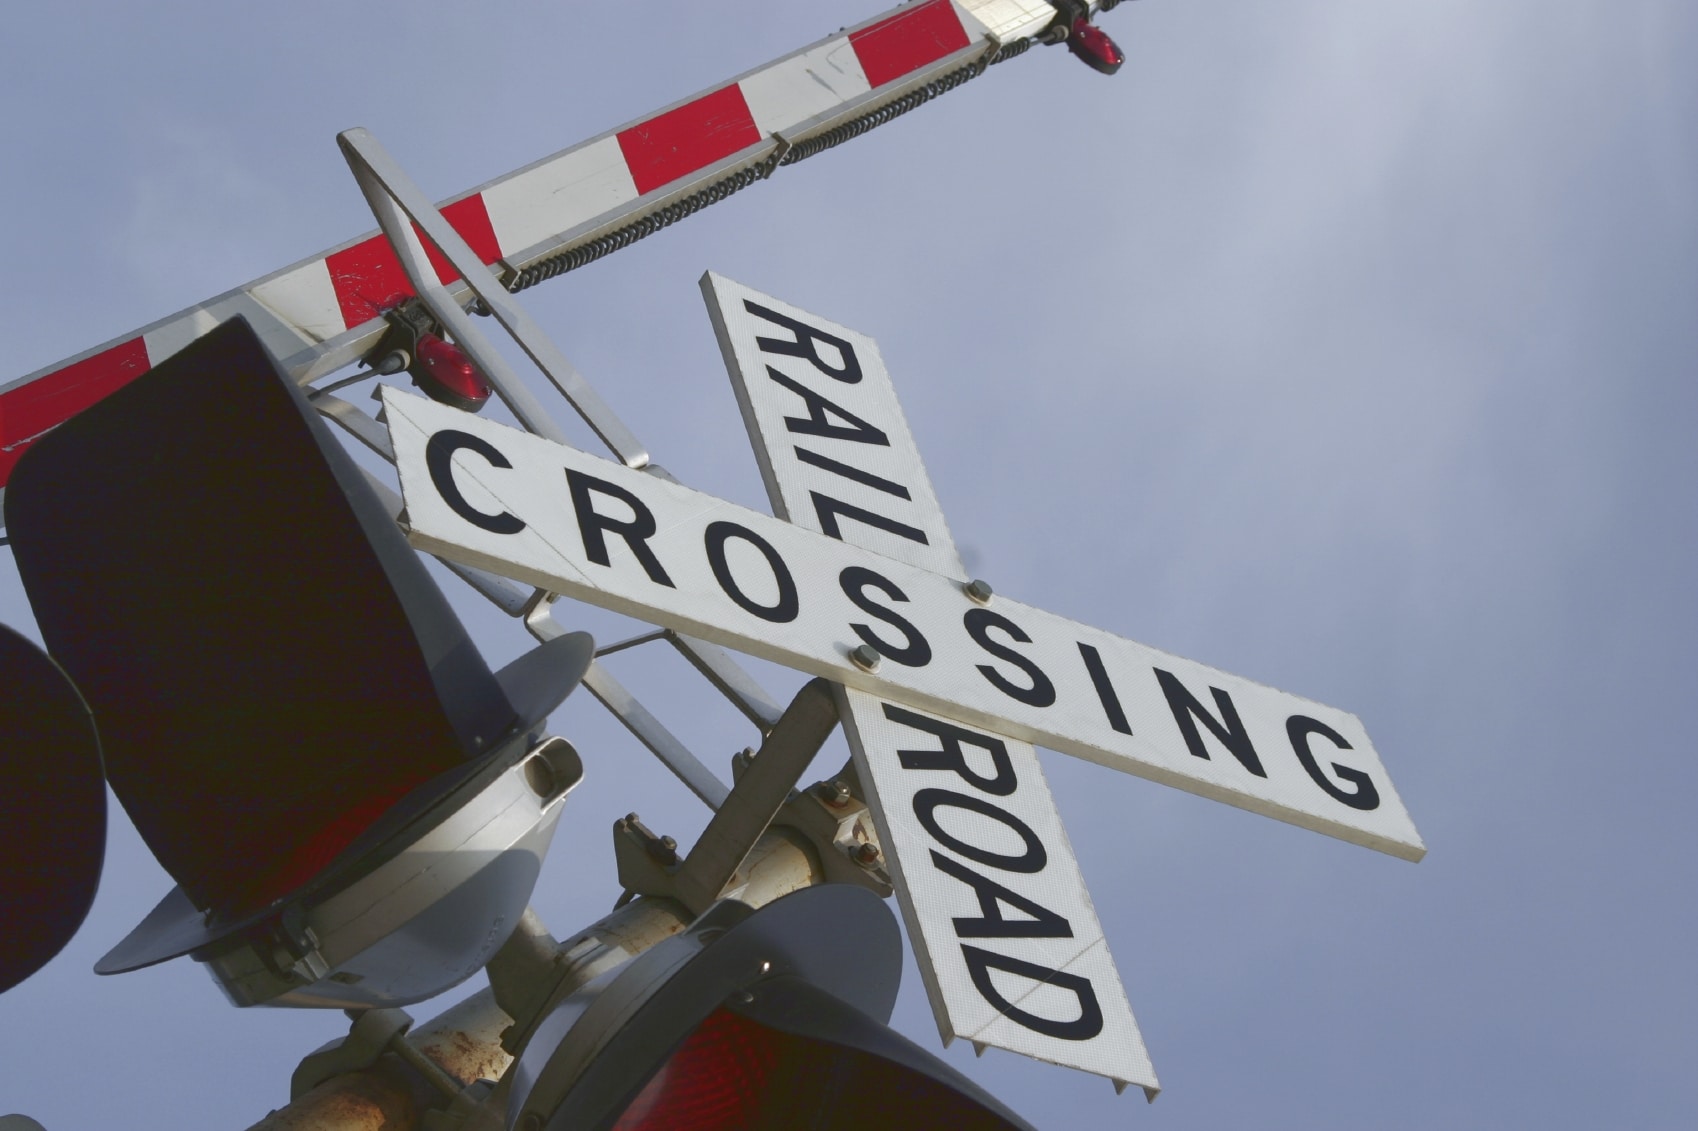 Officials Hope to Reduce Accidents at Railroad Crossings